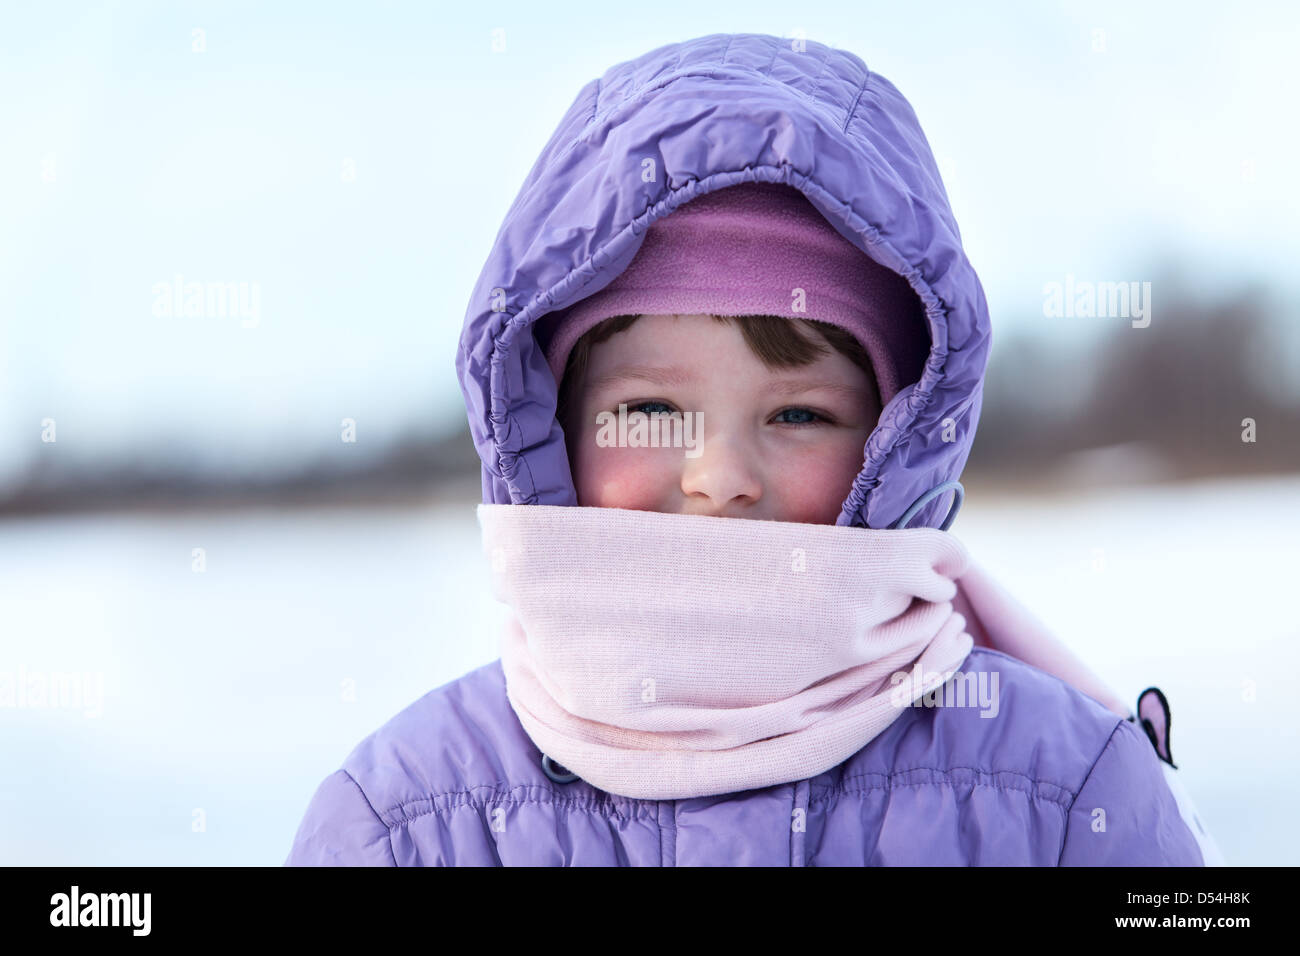 Portrait of wrapped in warm clothes small child in winter season Stock Photo